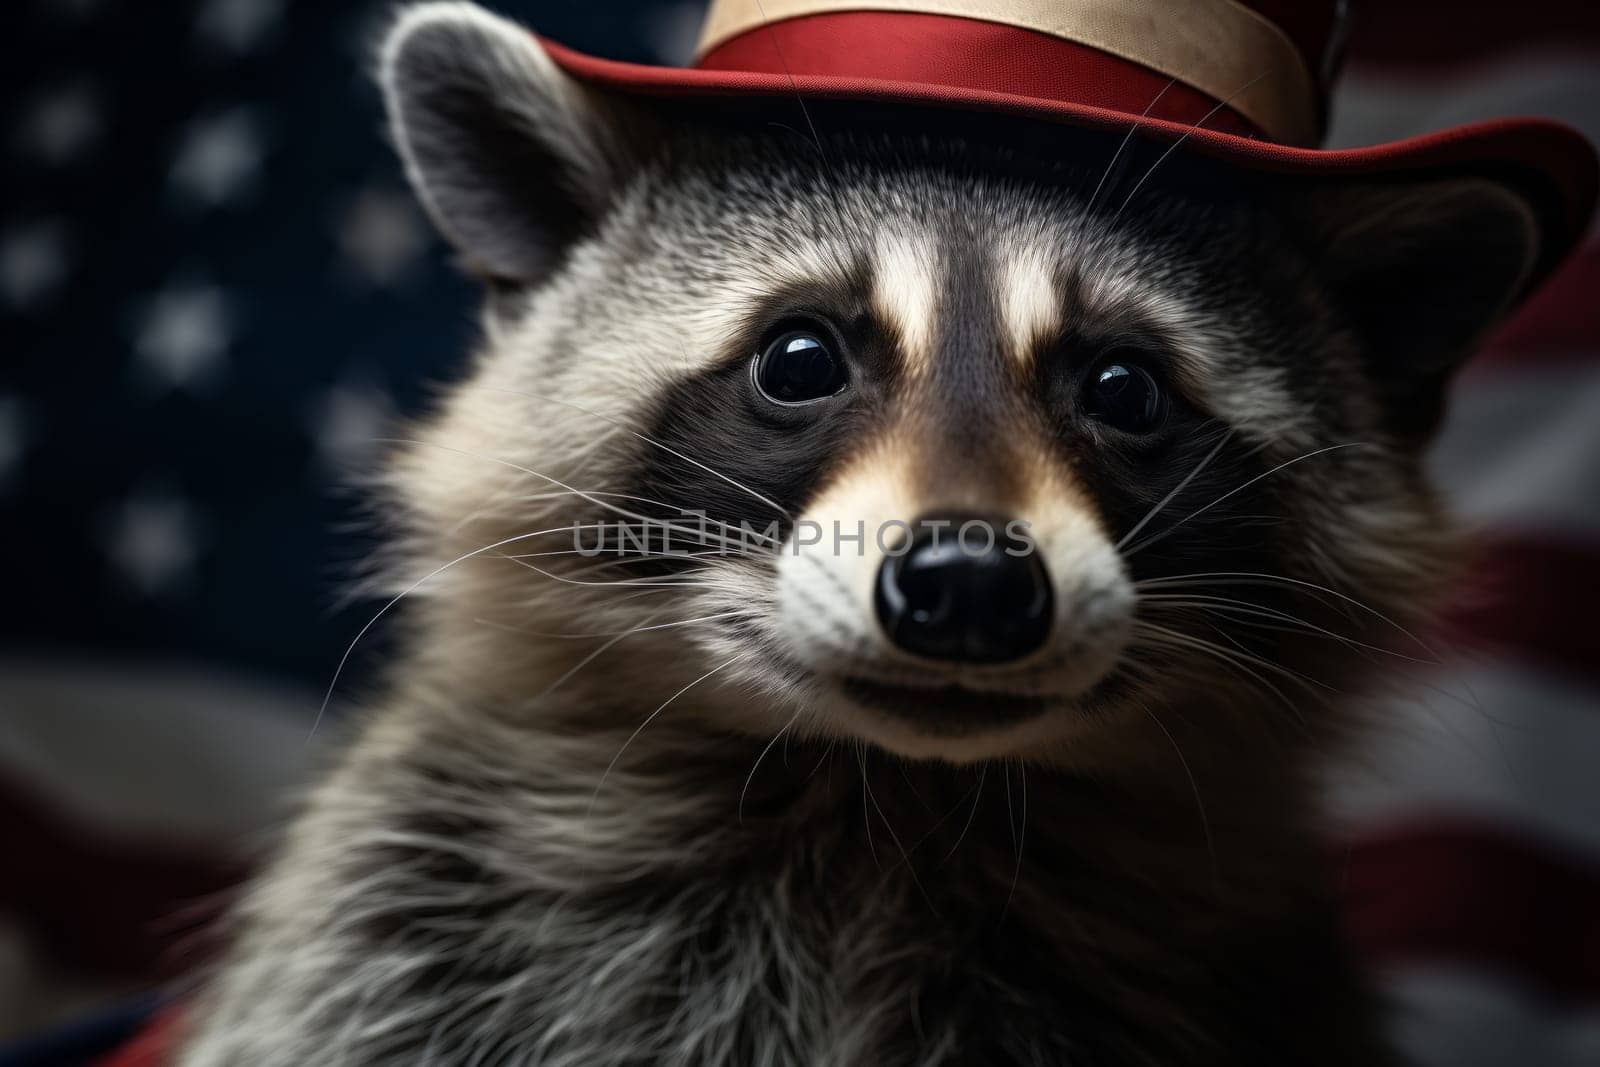 Raccoon Wearing Top Hat With American Flag Background by Sd28DimoN_1976